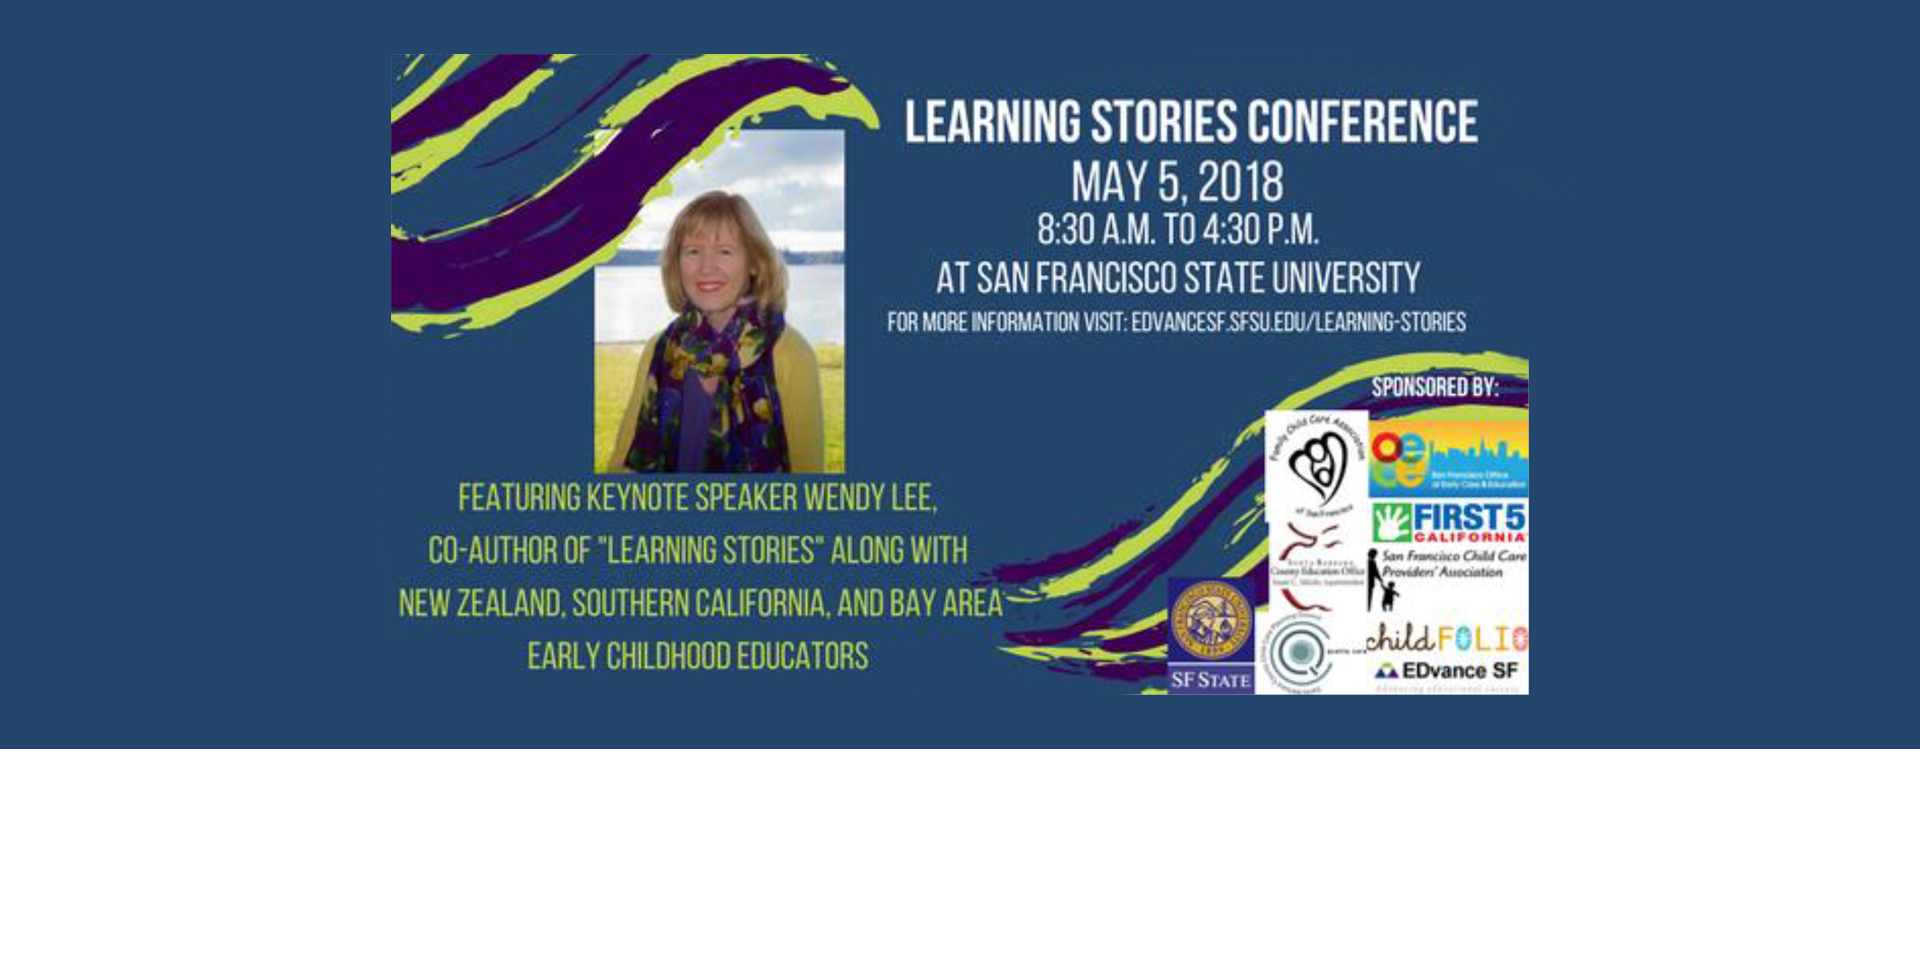 Learning Stories Conference flyer 5-8-18